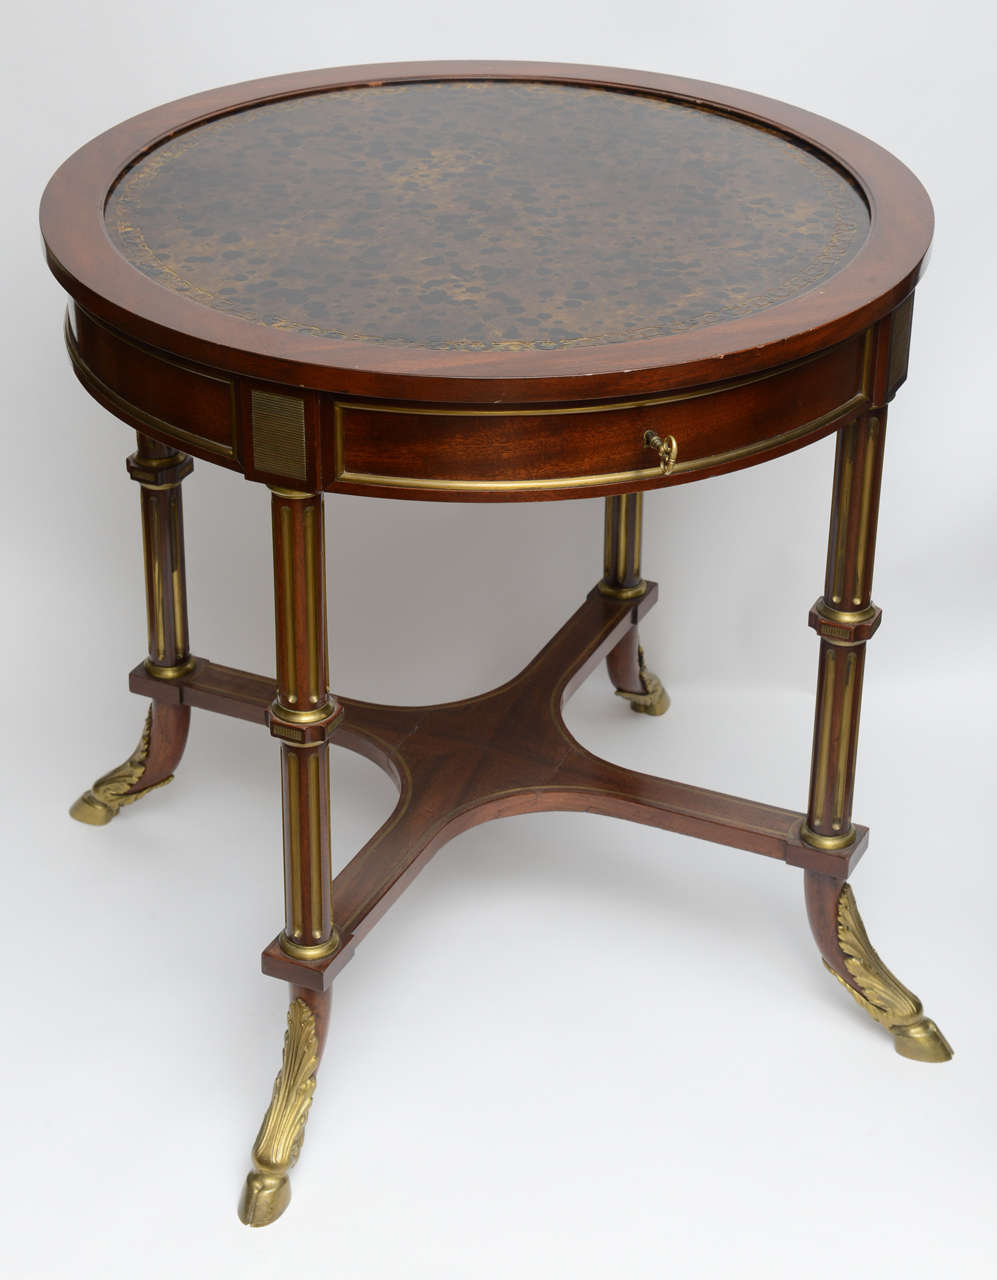 Most unusual & unique table which opens to a square card/ games table.  Manufactured by a small workshop in France that did a very limited number of high quality pieces.  Beautifully hand made of mahogany with very crisp ormolu mounts.  The tooled